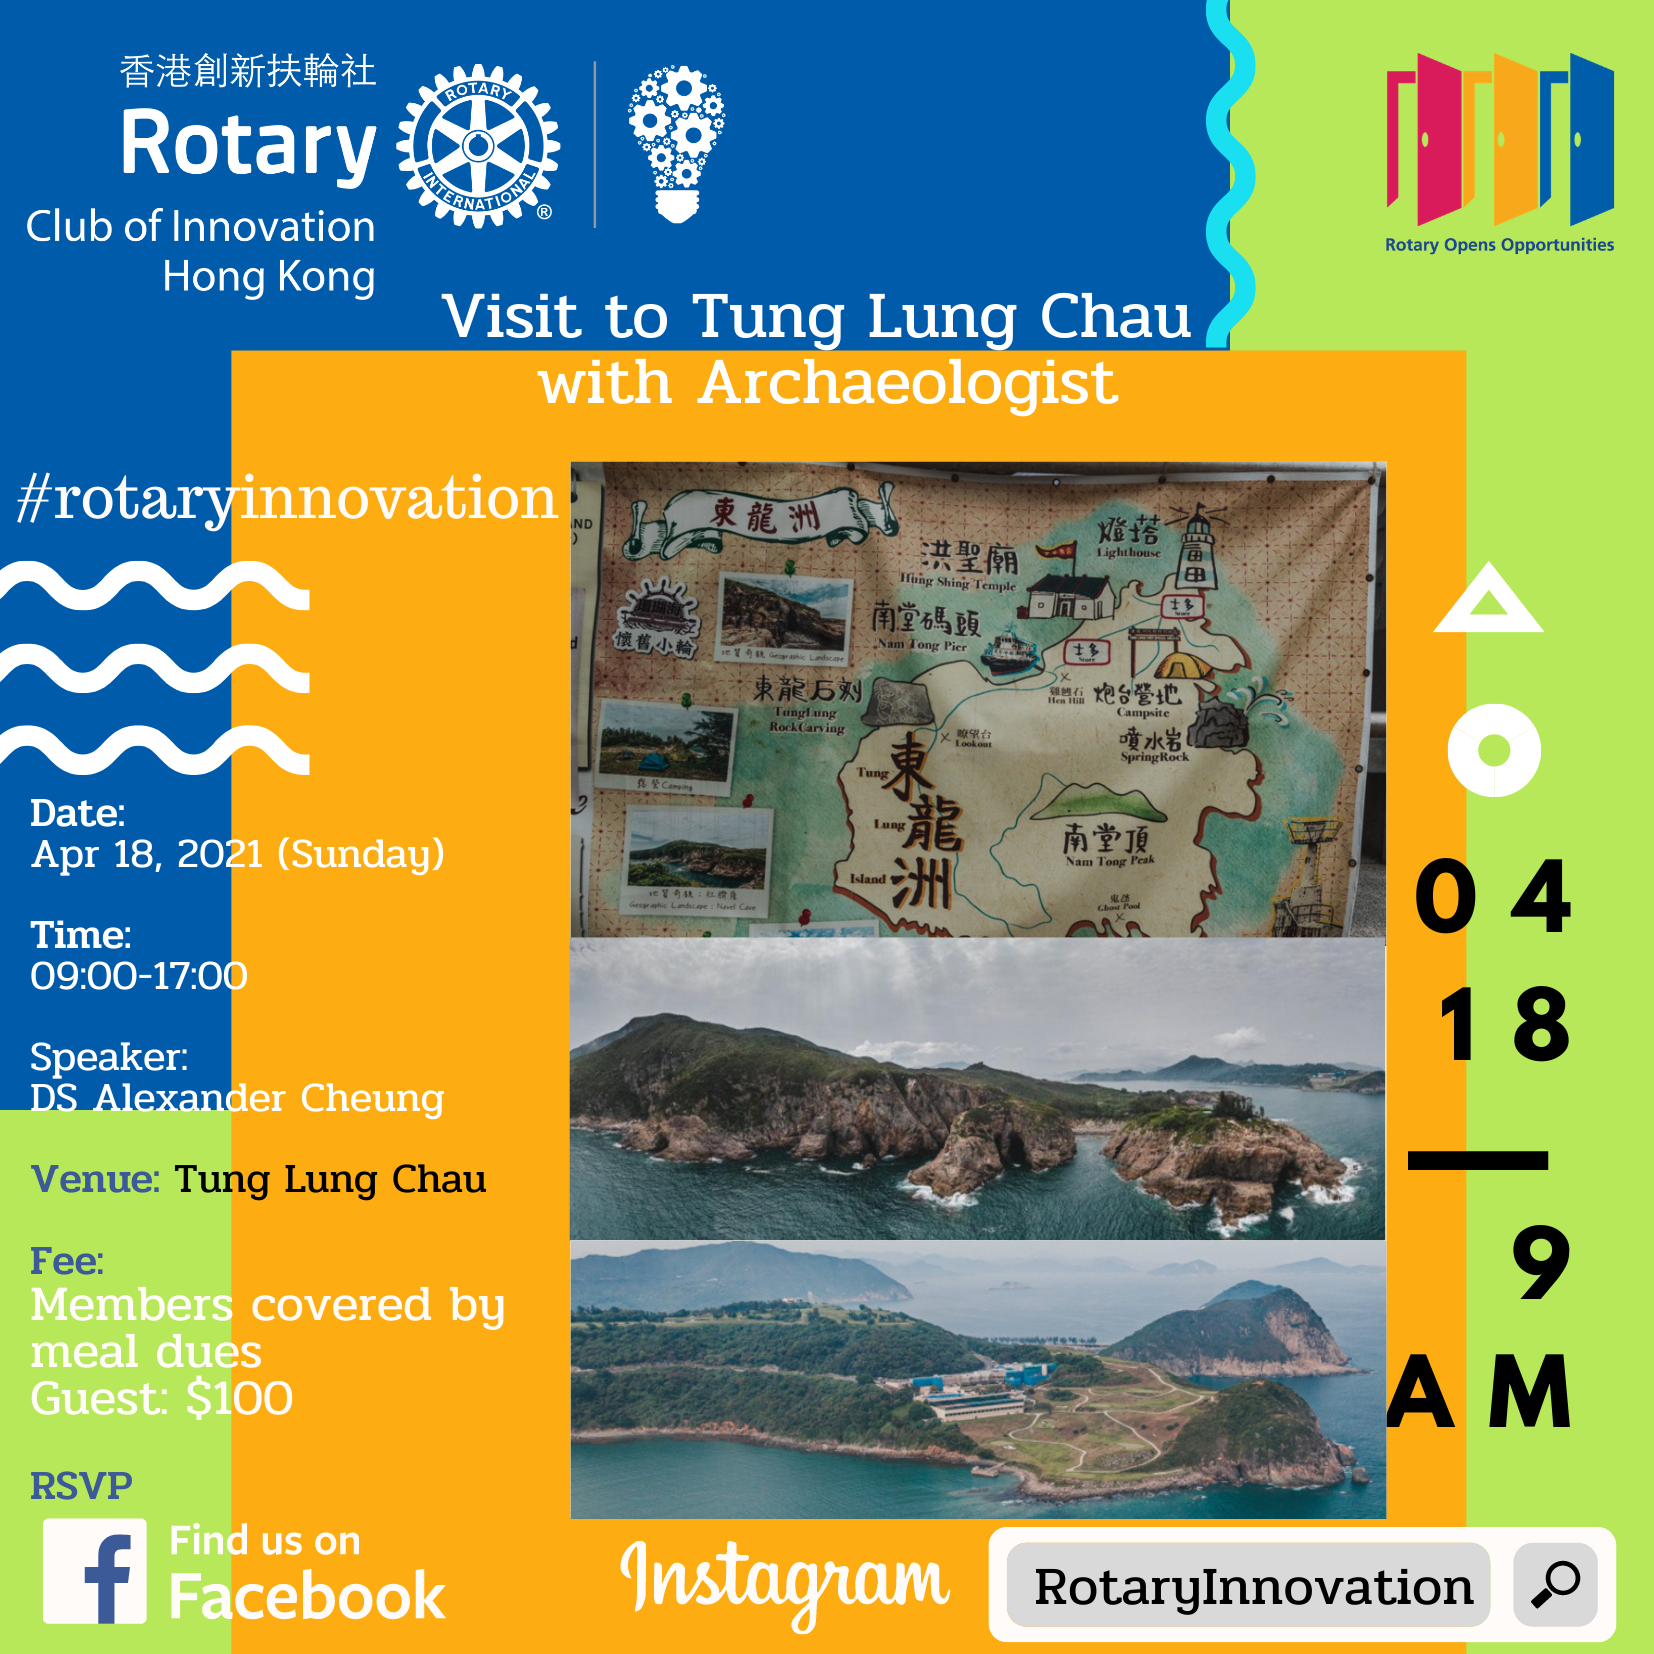 Visit to Tung Lung Chau with Archaeologist (18 Apr 2021)